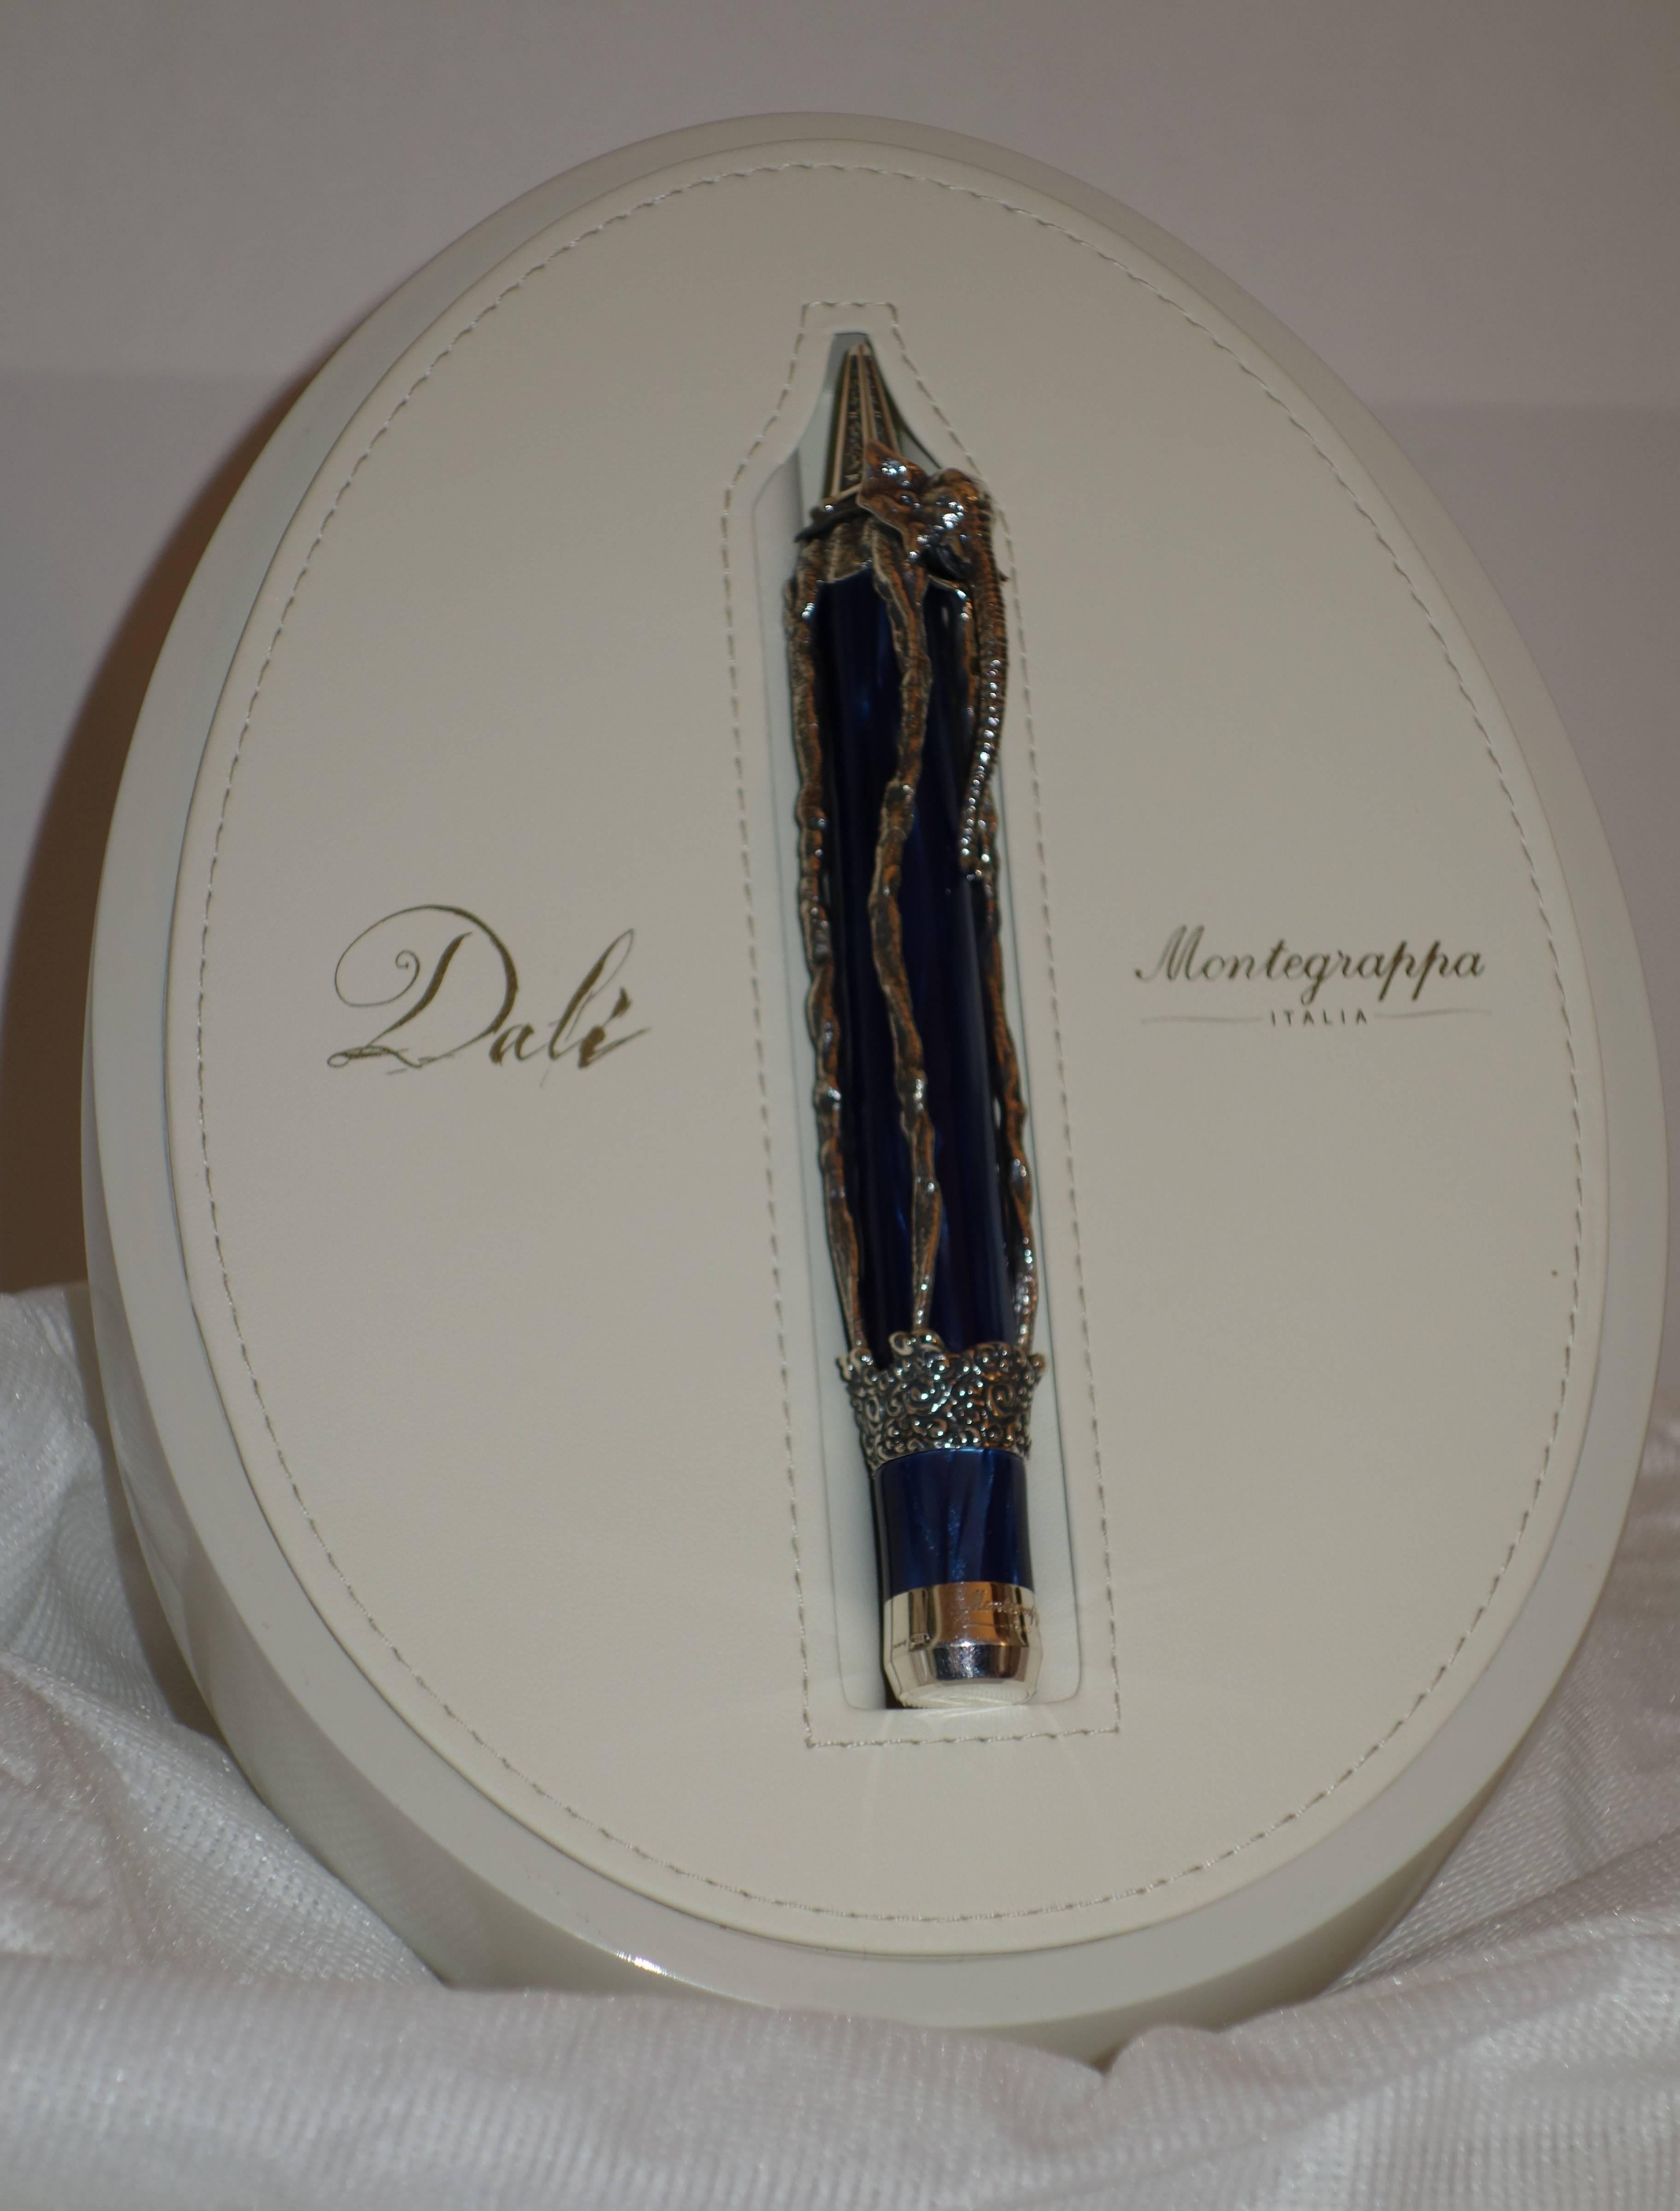 Salvador DALI
Cosmic Elephant

Limited edition Fountain Pen (Size of the nib : M)
With sterling silver sculpture by Dali
Also made from precious blue resin
Engraved signtaure of Dali
Limited edition numbered / 1000 copies
With certificate of